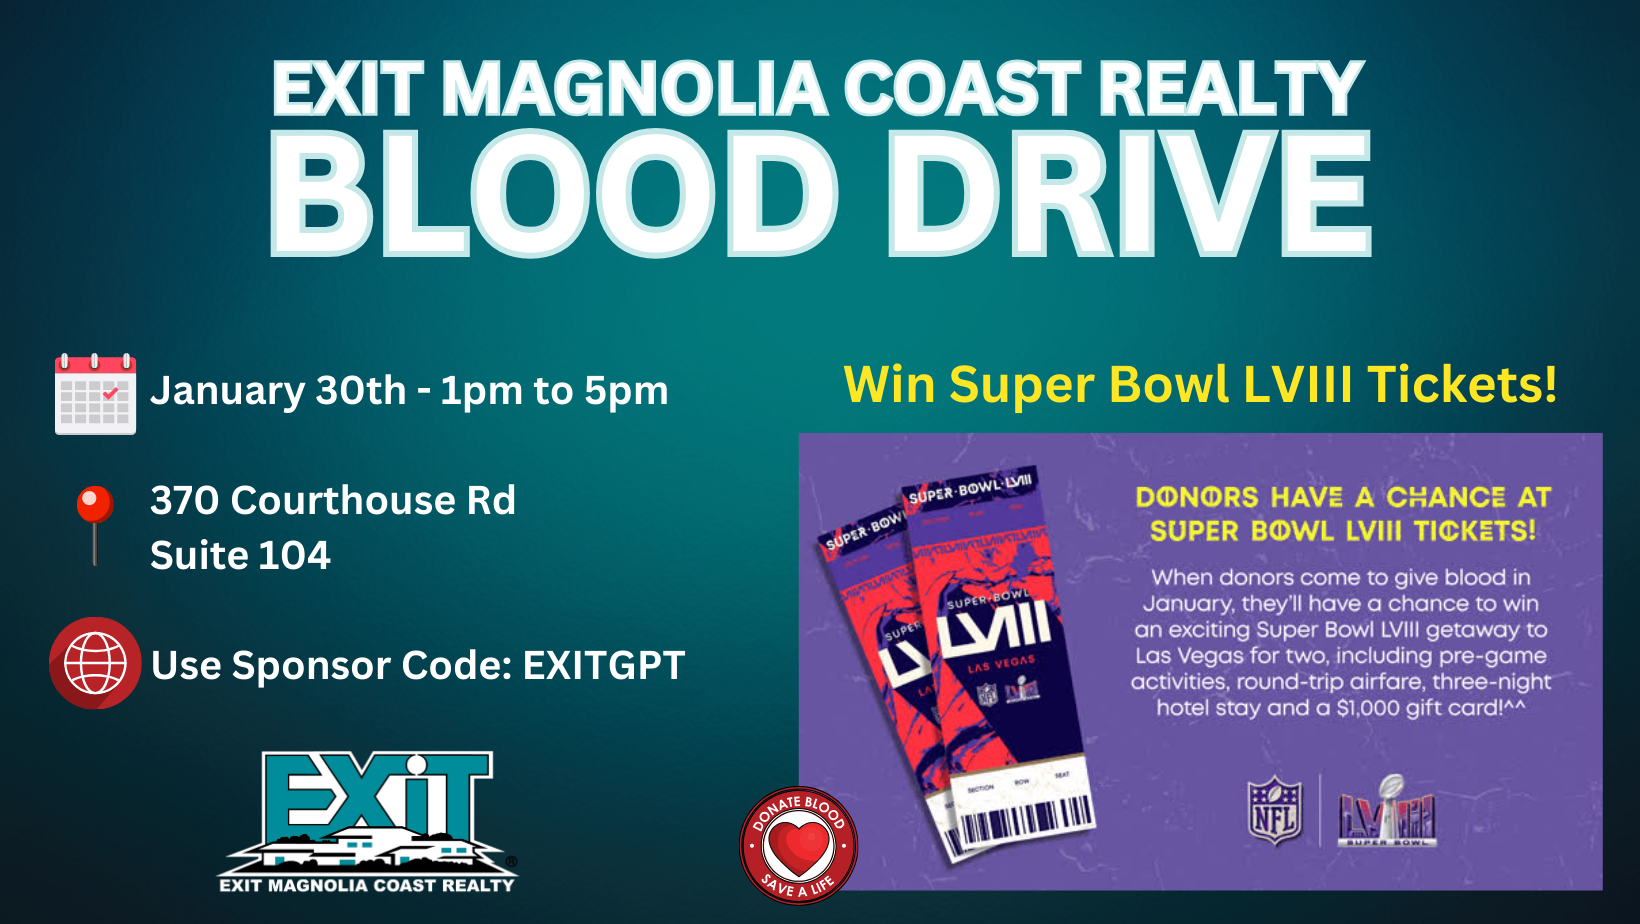 Making an Impact: EXIT Magnolia Coast Realty Hosts Blood Drive on January 30th